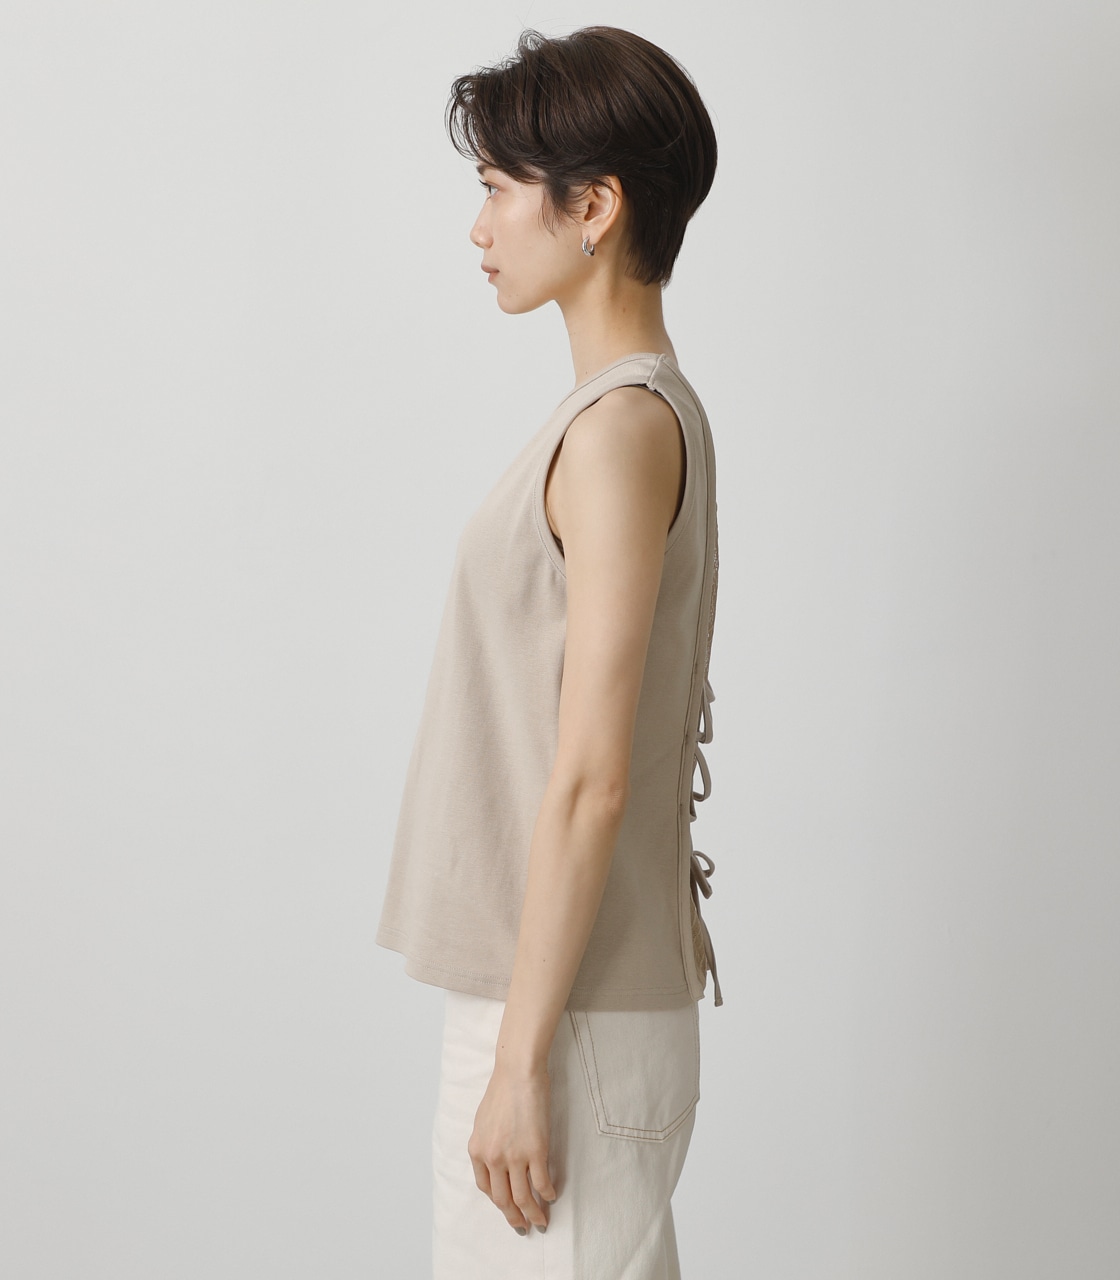 BACK LACE DOCKING TOPS/バックレースドッキングトップス 詳細画像 L/BEG 6